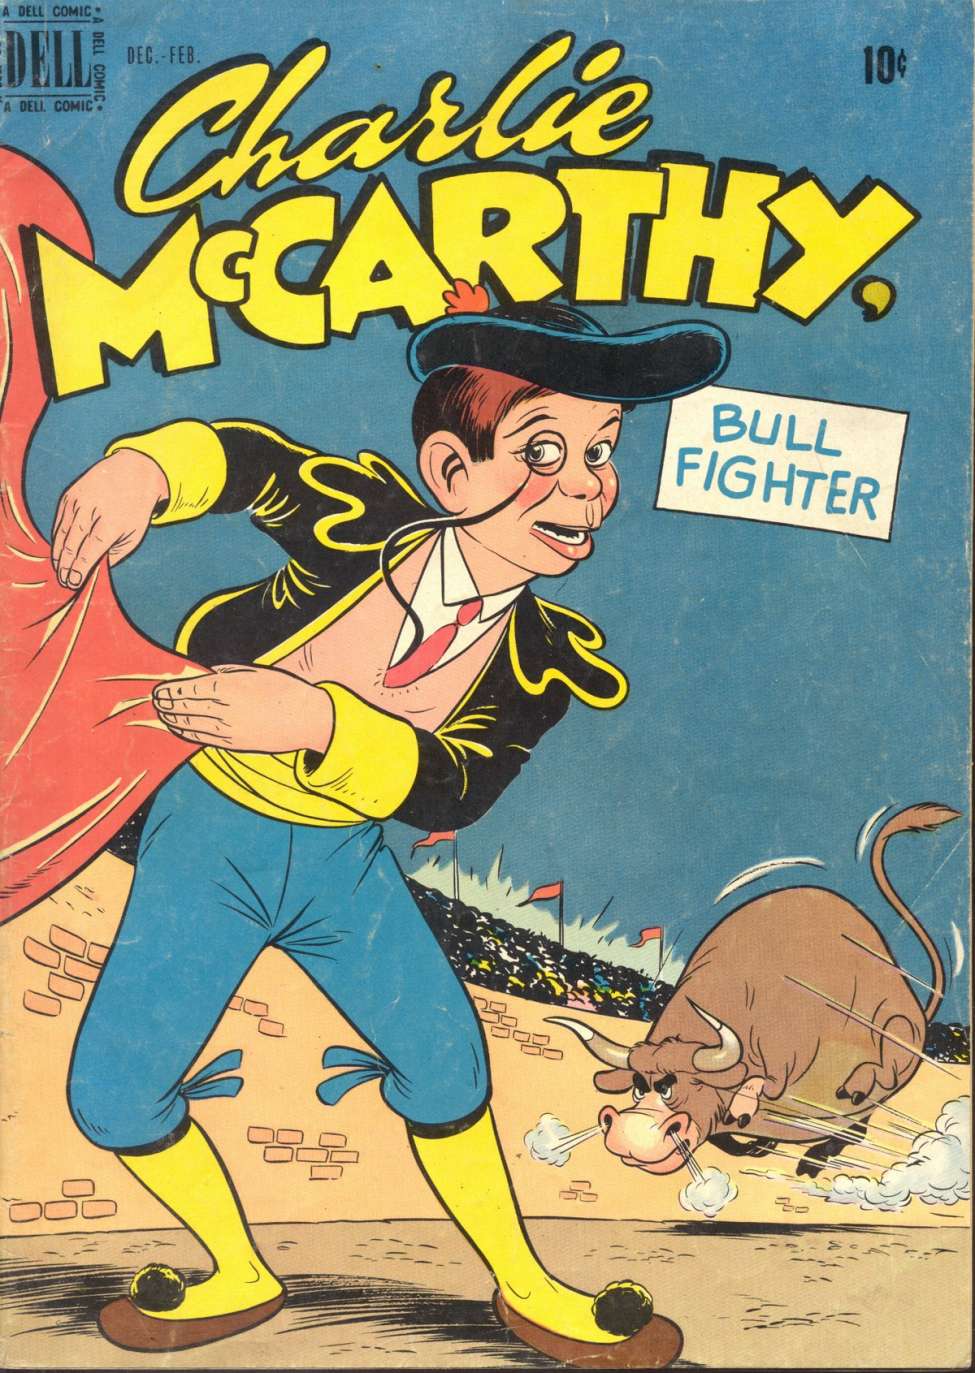 Comic Book Cover For Charlie McCarthy 4